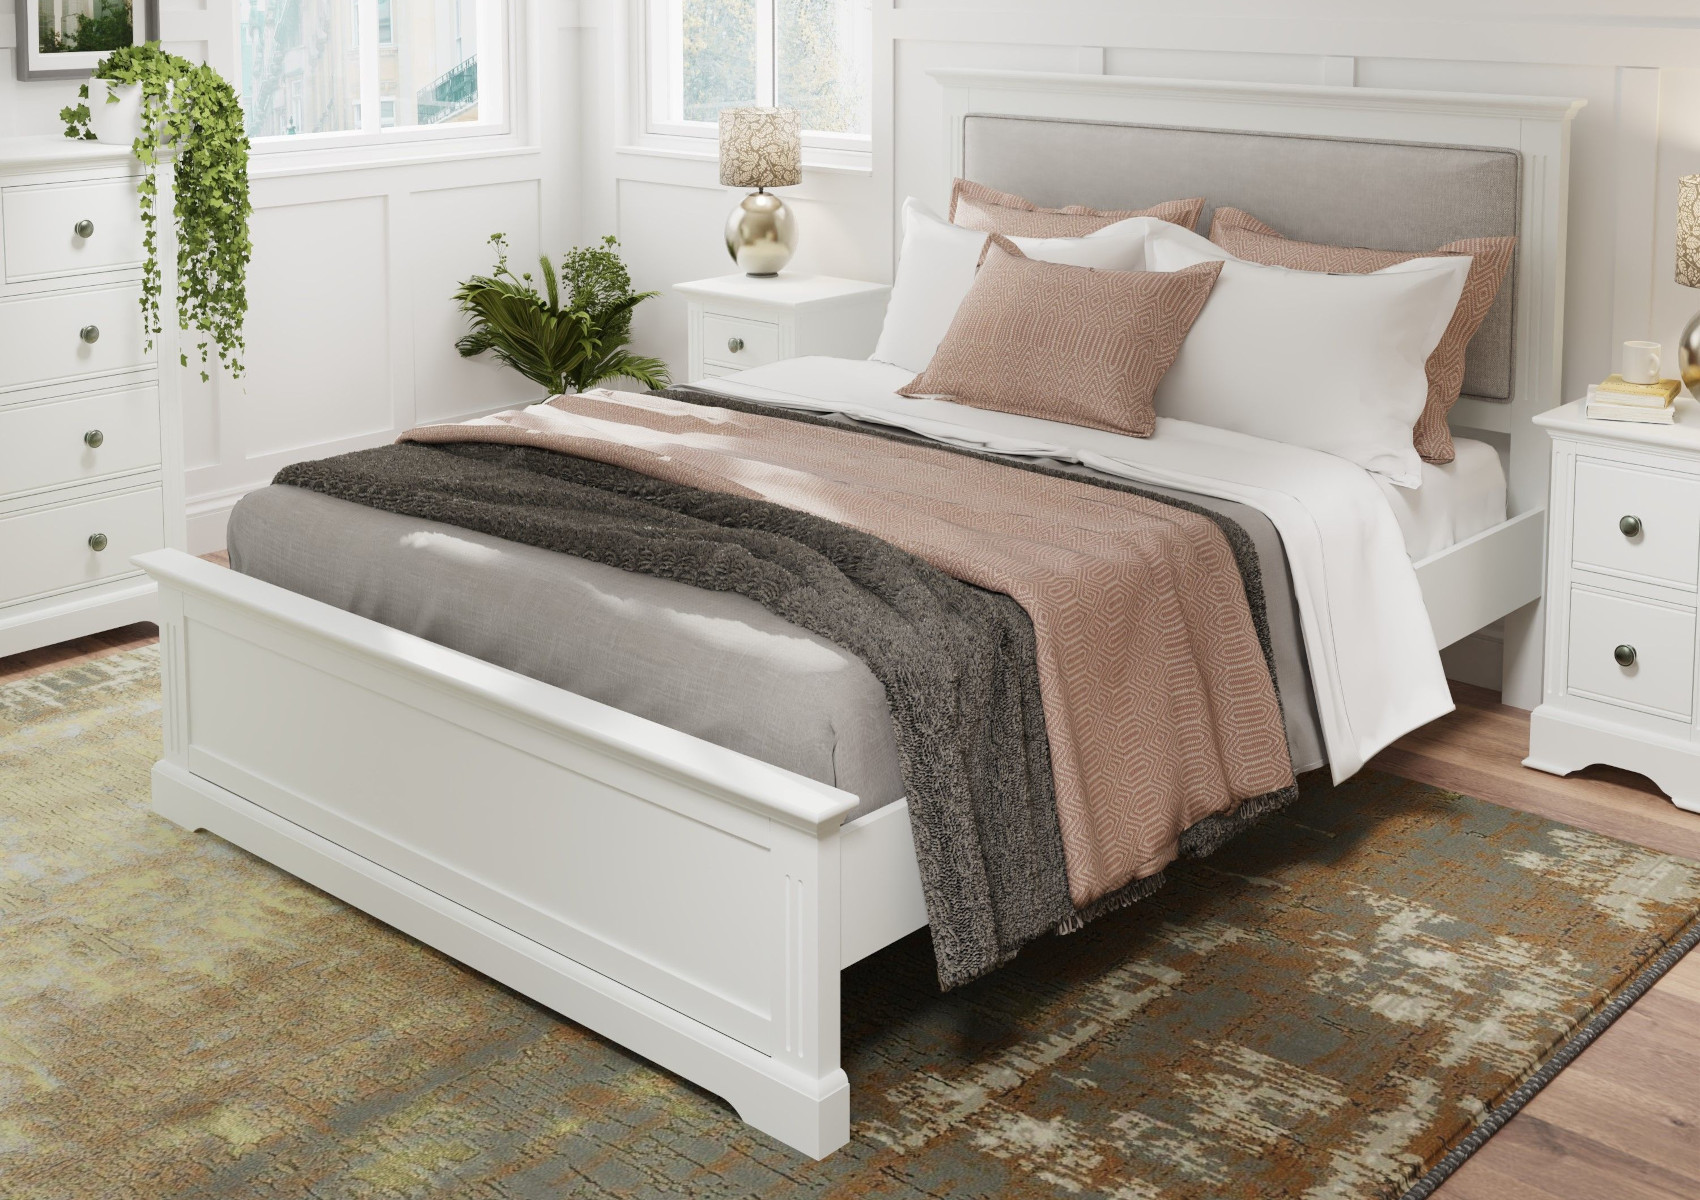 View Tilly White Wooden Bed Frame Time4Sleep information